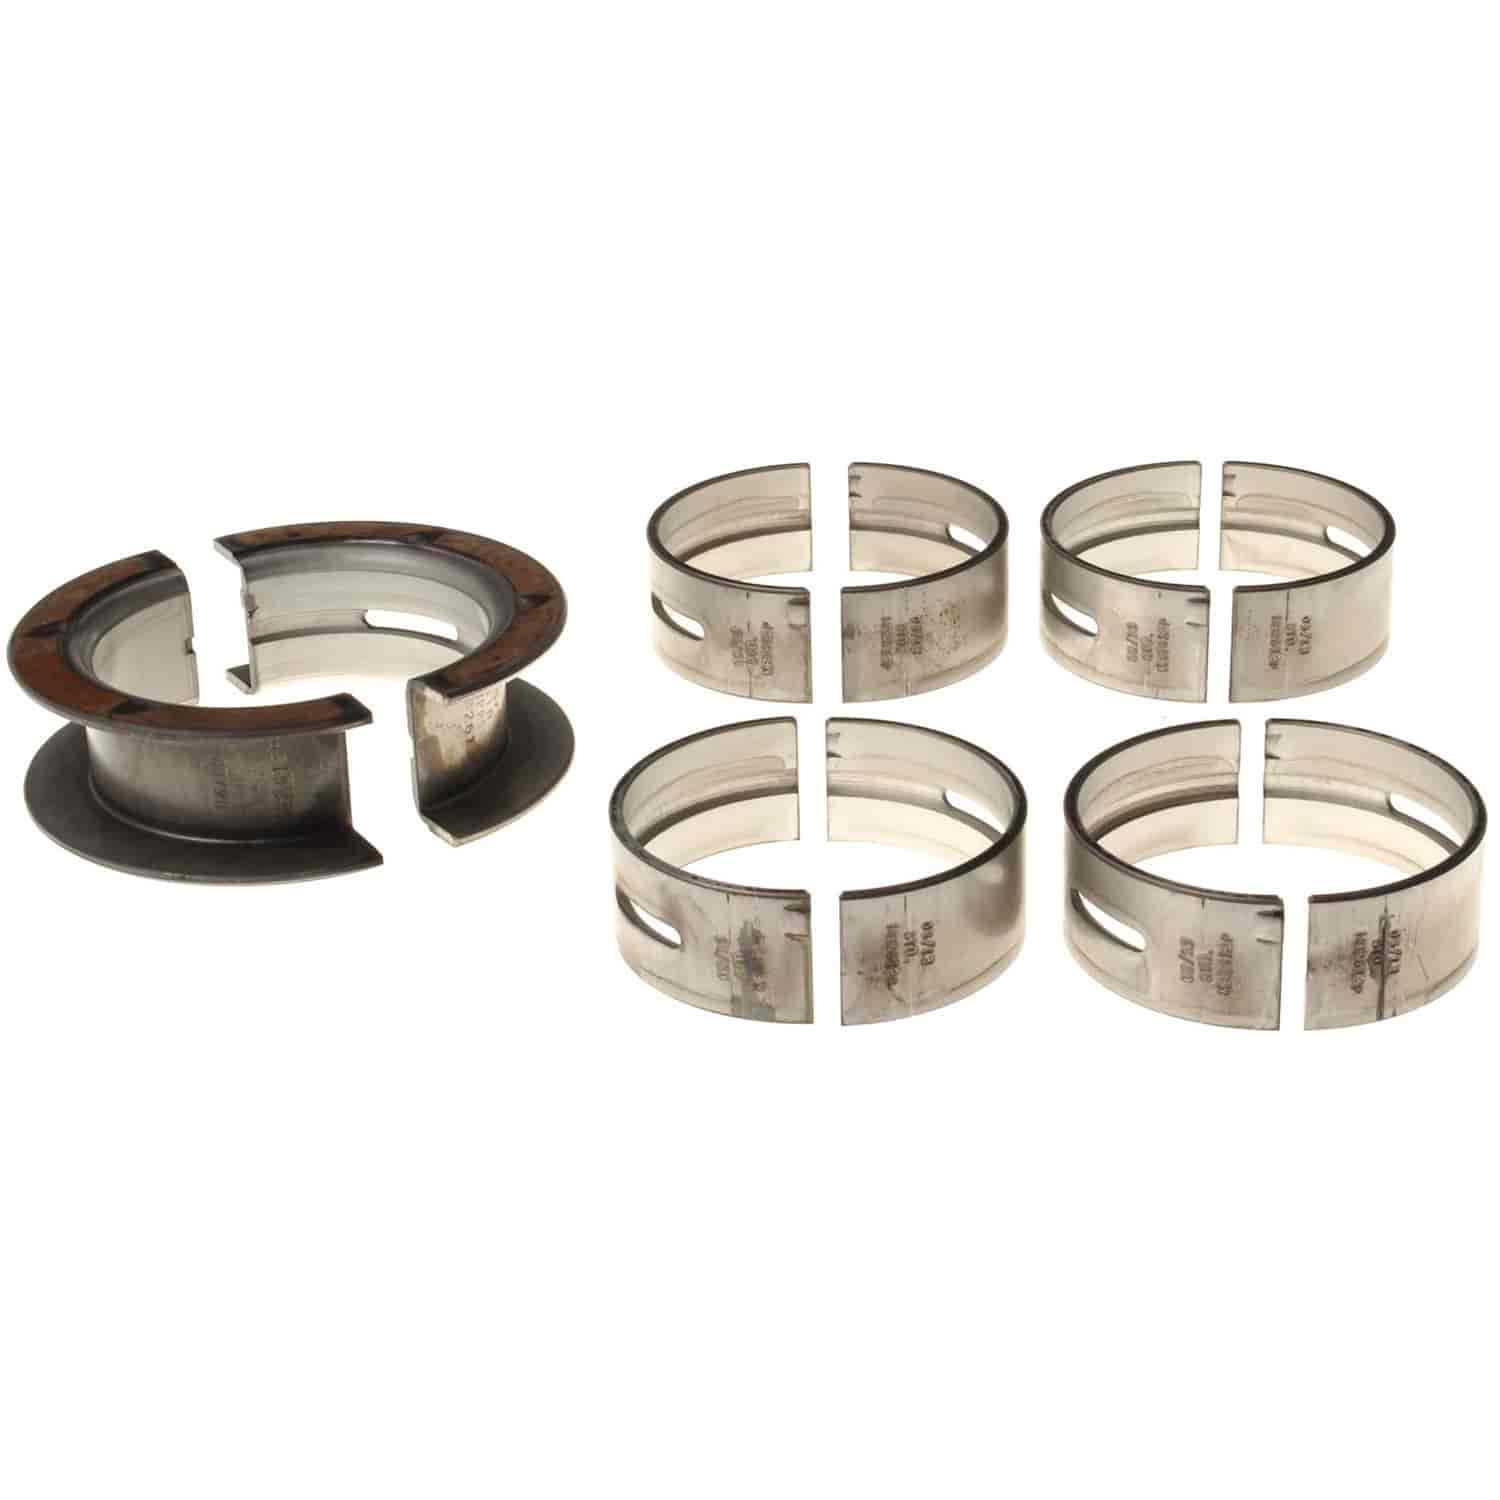 Main Bearing Set Ford 1974-1997 L4 2.0/2.3L with -.25mm Undersize